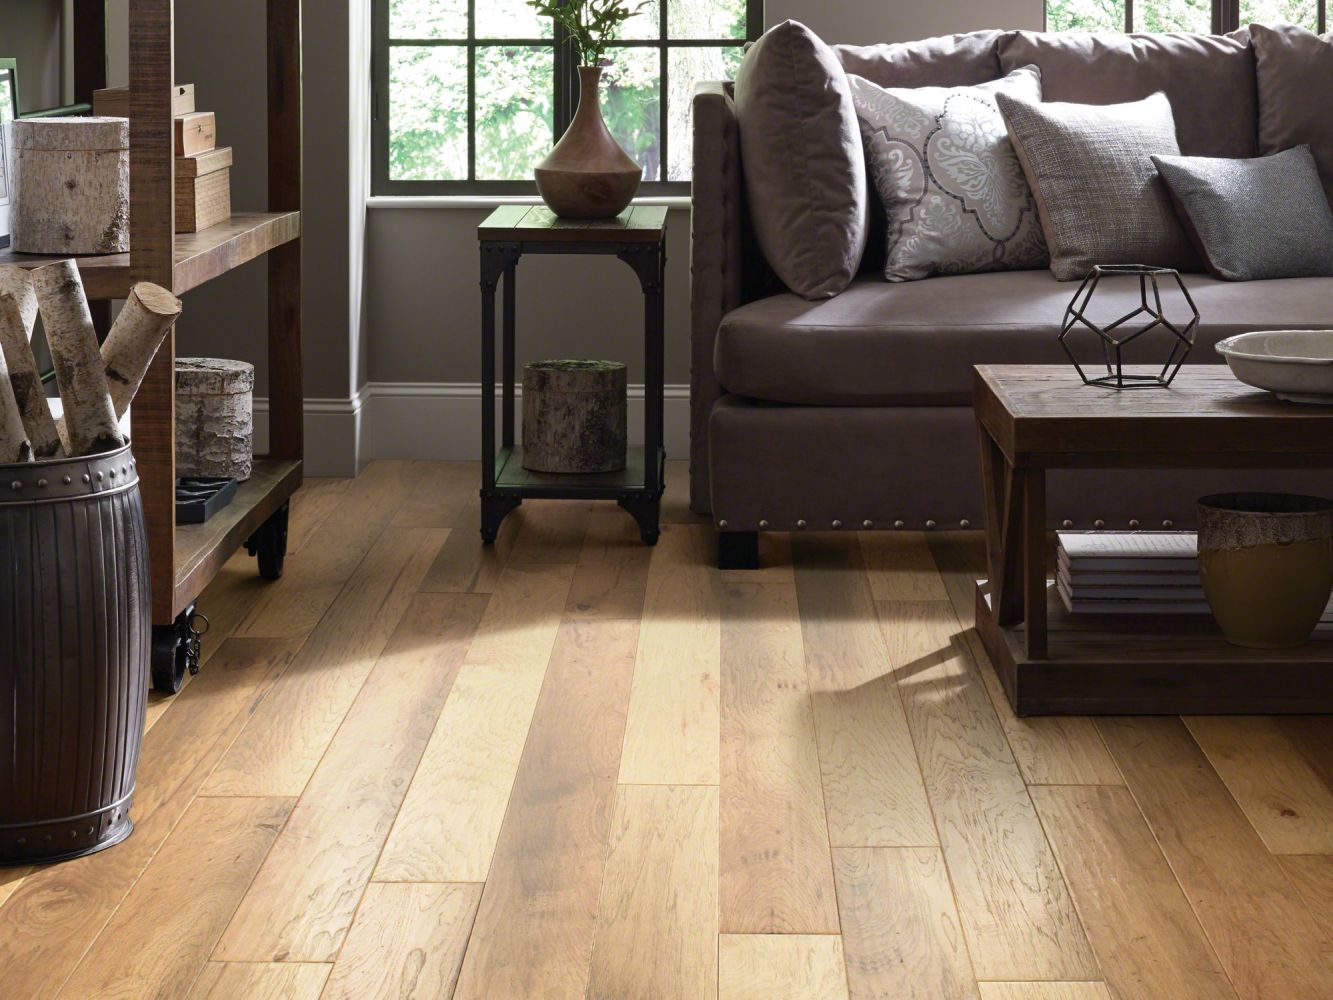 Anderson Tuftex Hardwood Floors Finished With Intention In